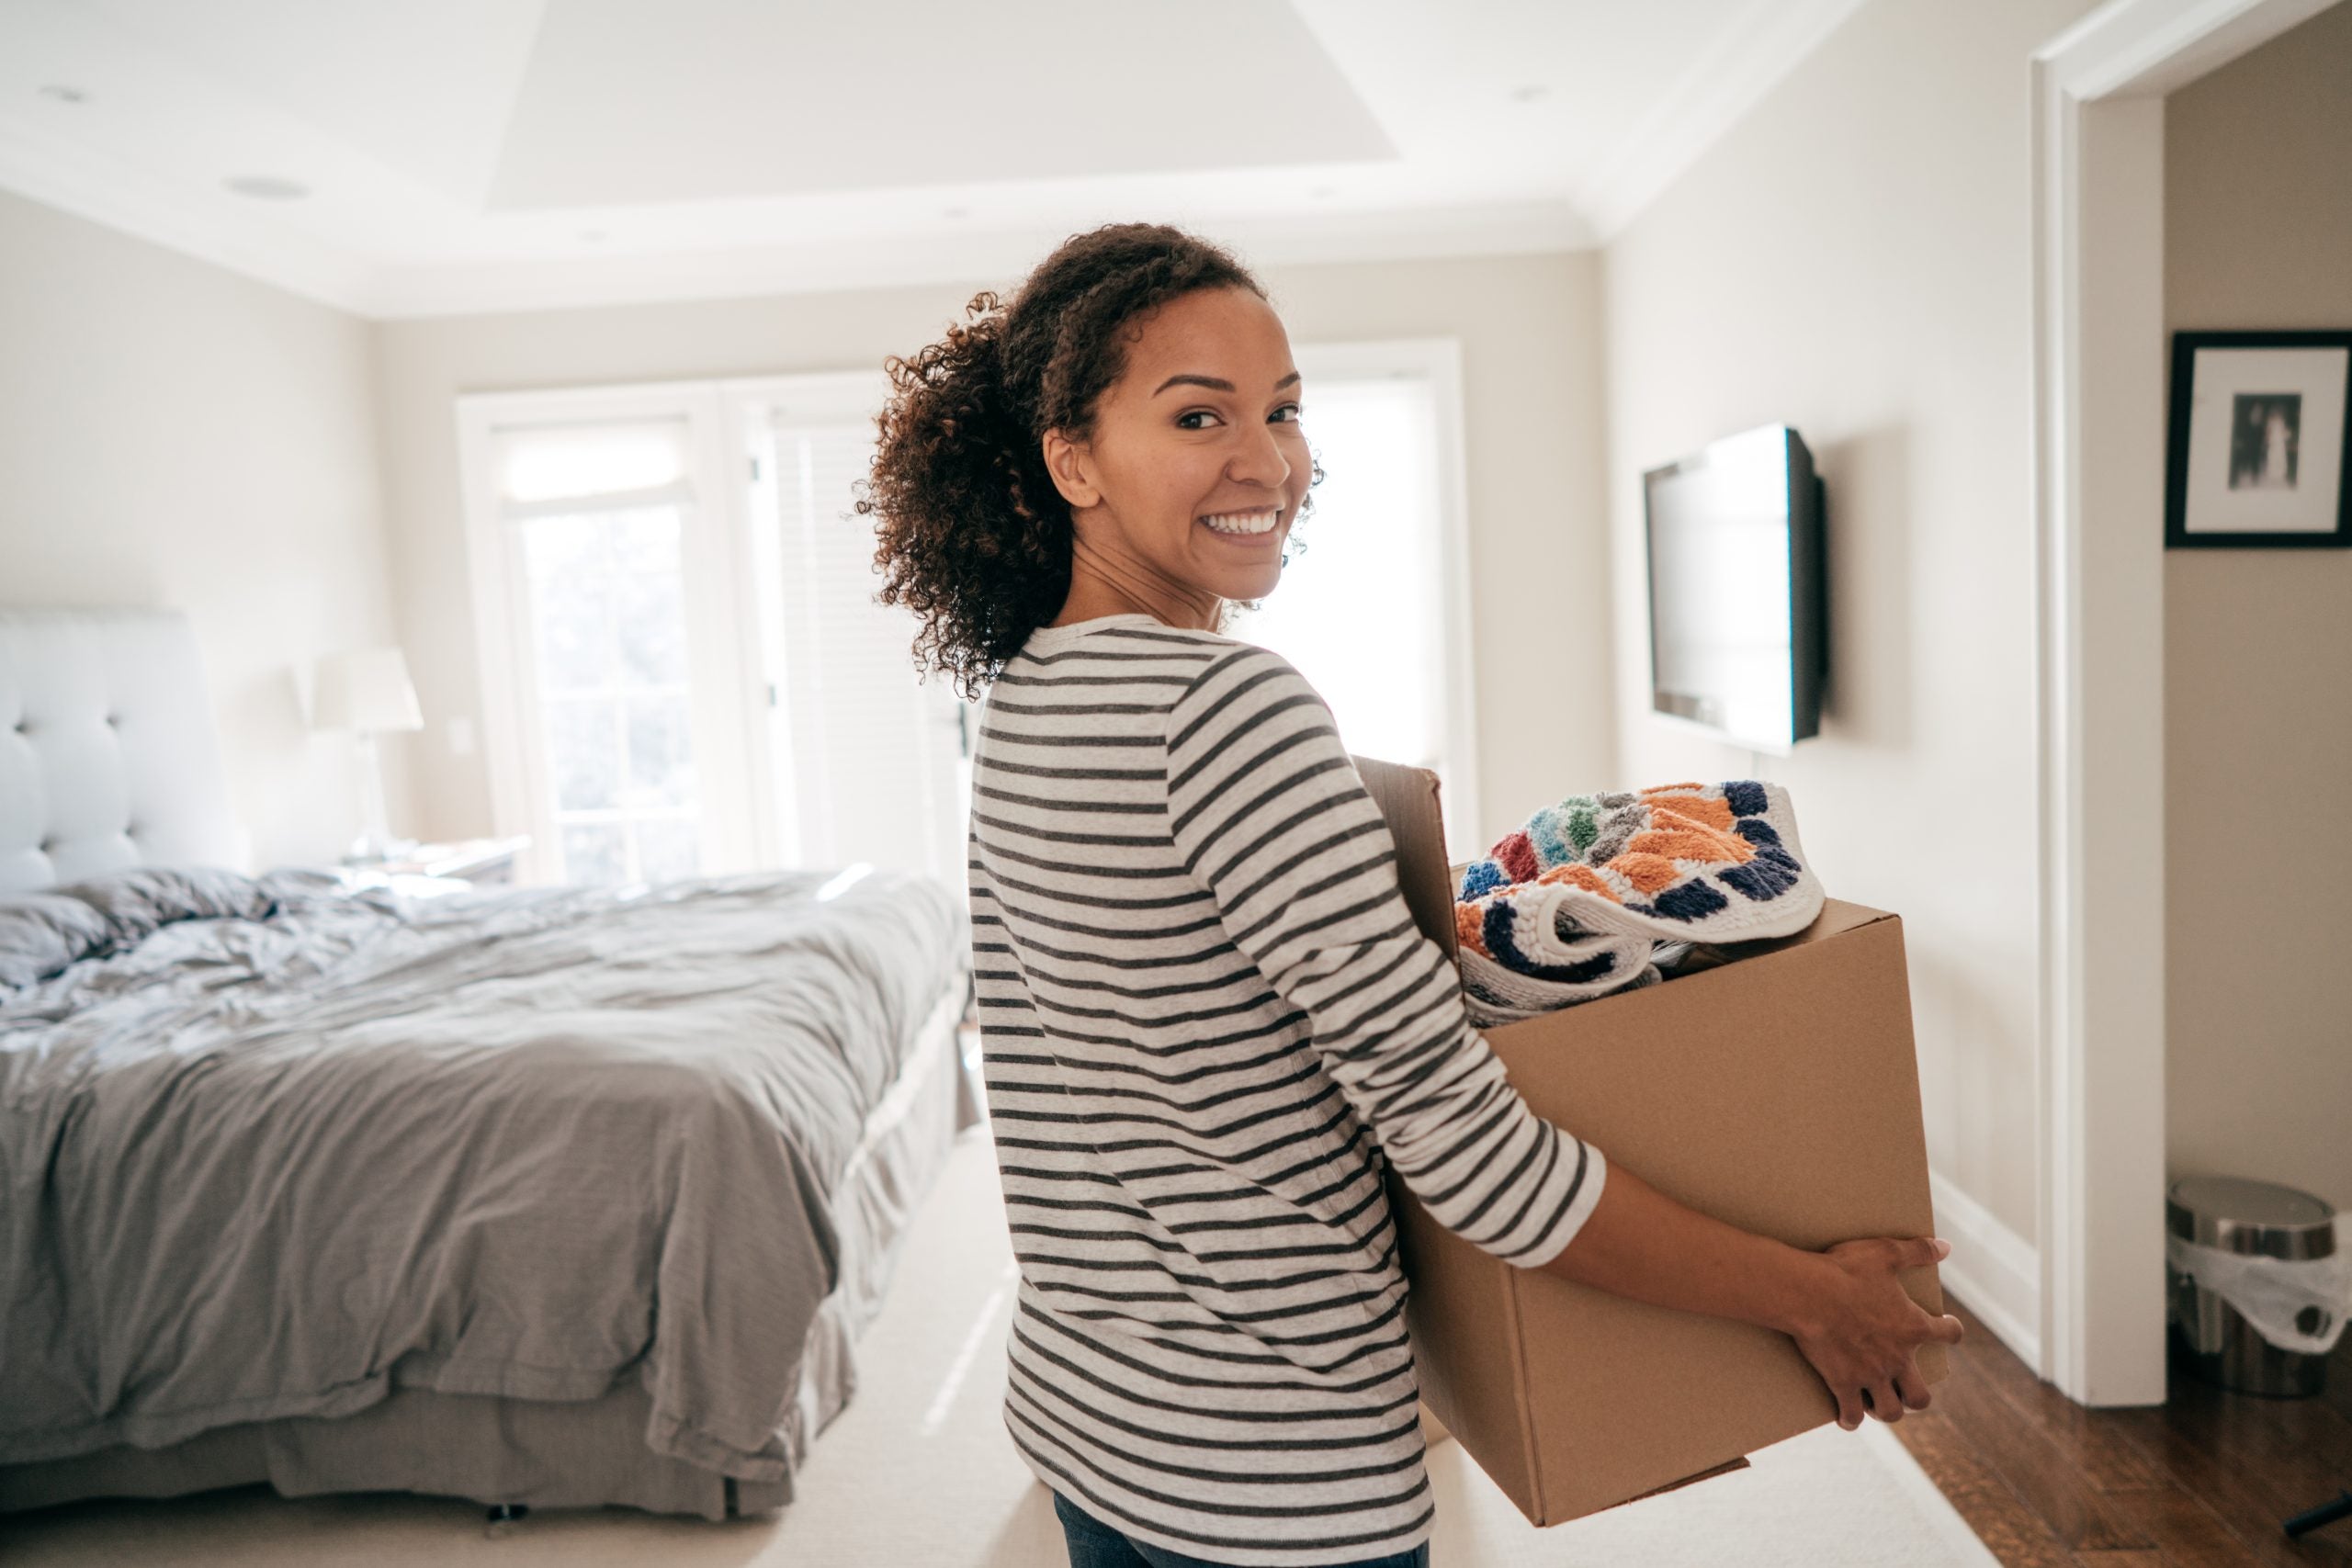 Spring Awakening: A Guide To Downsizing And Decluttering. Here’s 16 Tips To Help Get You Started